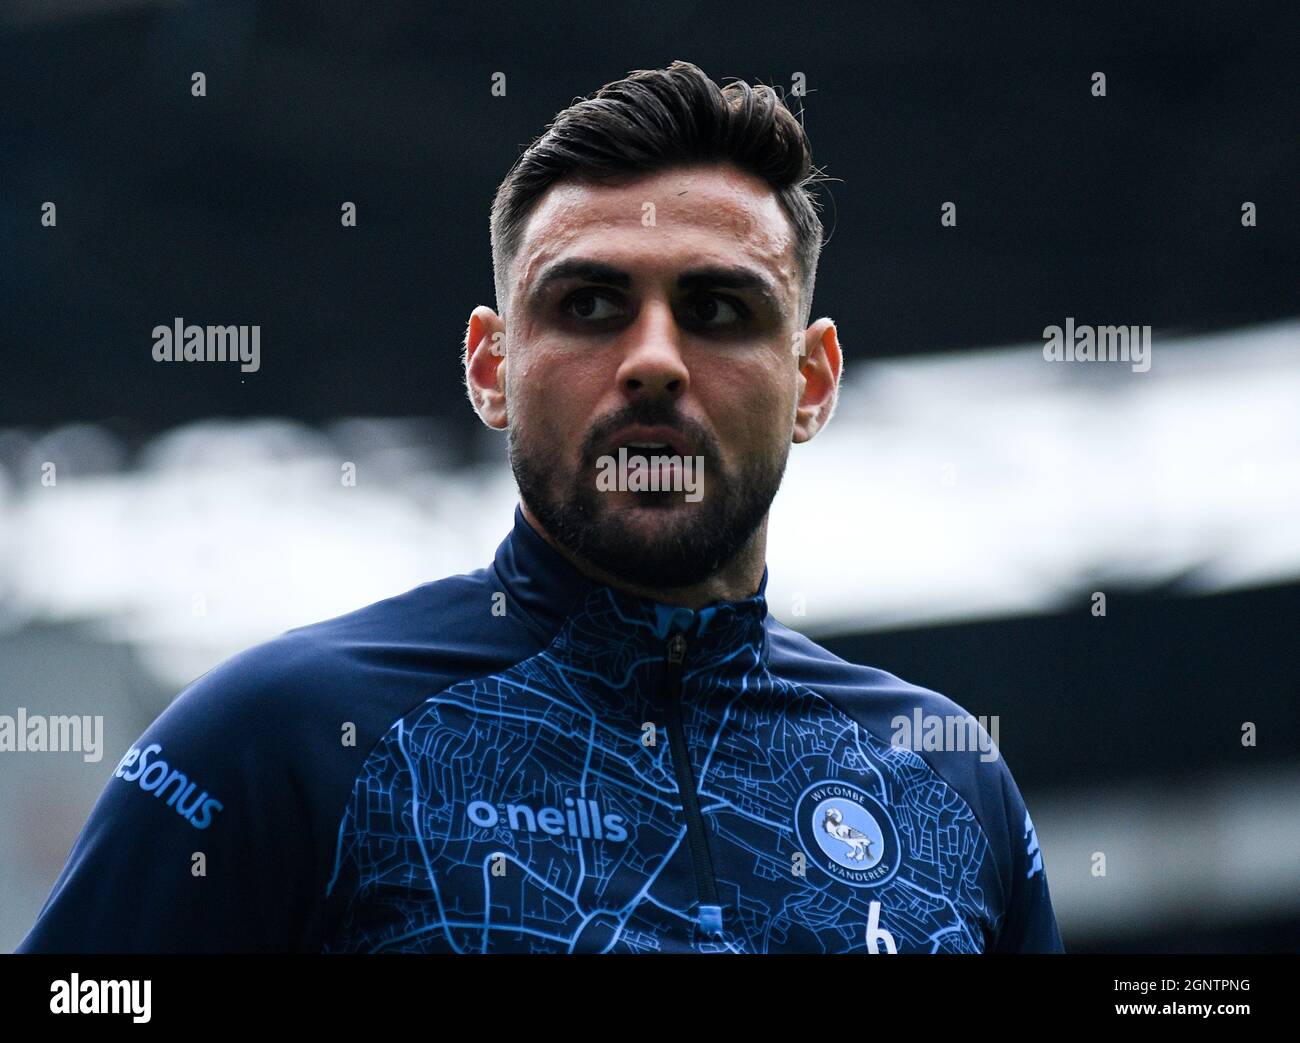 MILTON KEYNES, ENGLAND - SEPTEMBER 25, 2021: Ryan Sirous Tafazolli of Wycombe pictured ahead of the 2021/22 SkyBet EFL League One matchweek 9 game between MK Dons FC and Wycombe Wanderers FC at Stadium MK. Copyright: Cosmin Iftode/Picstaff Stock Photo